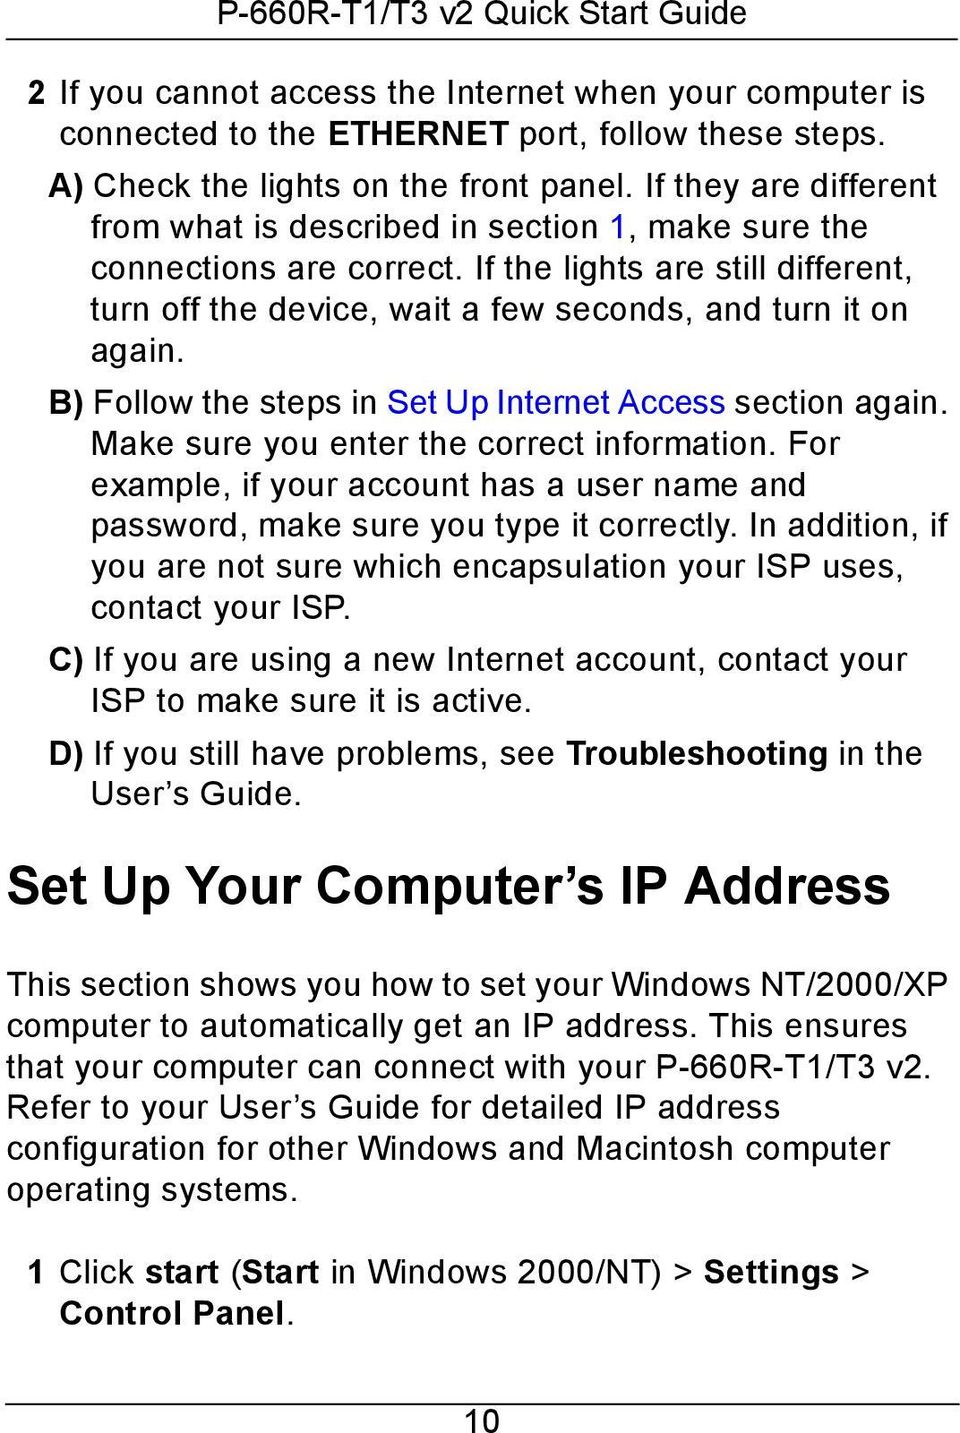 B) Follow the steps in Set Up Internet Access section again. Make sure you enter the correct information. For example, if your account has a user name and password, make sure you type it correctly.